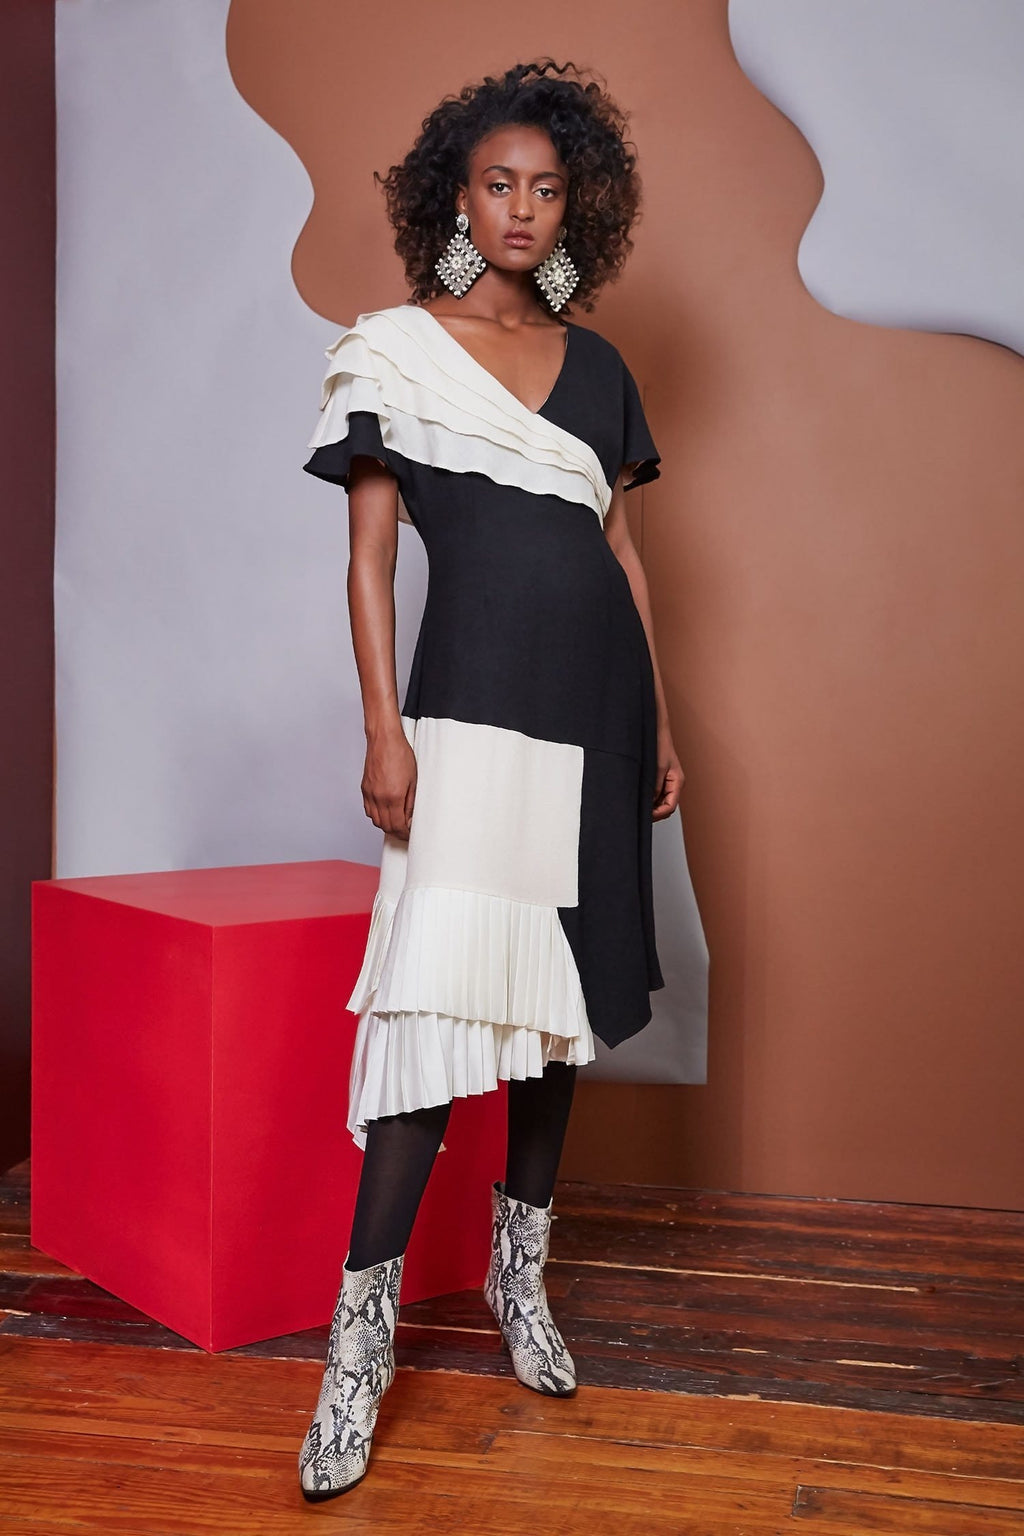 Lavanya Coodly Apparel & Accessories > Clothing > Dresses XS / Black/Ivory Lavanya Coodly Mackenzie Black & Ivory Color Block Merino Wool Midi Dress with V-Neck, Cap Sleeves, & Pleated Detail